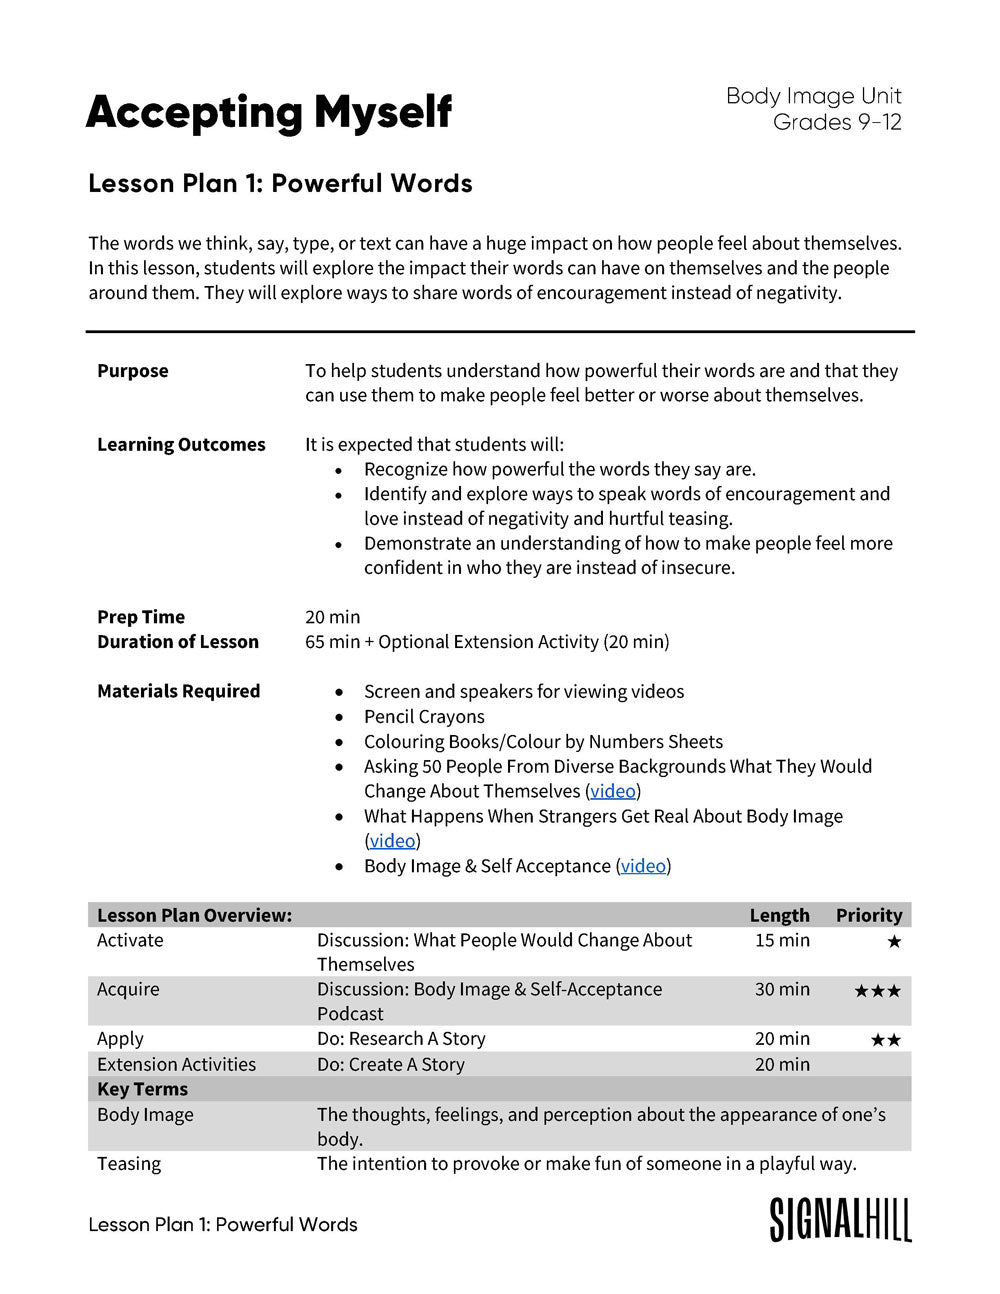 Lesson Plan 1: Powerful Words